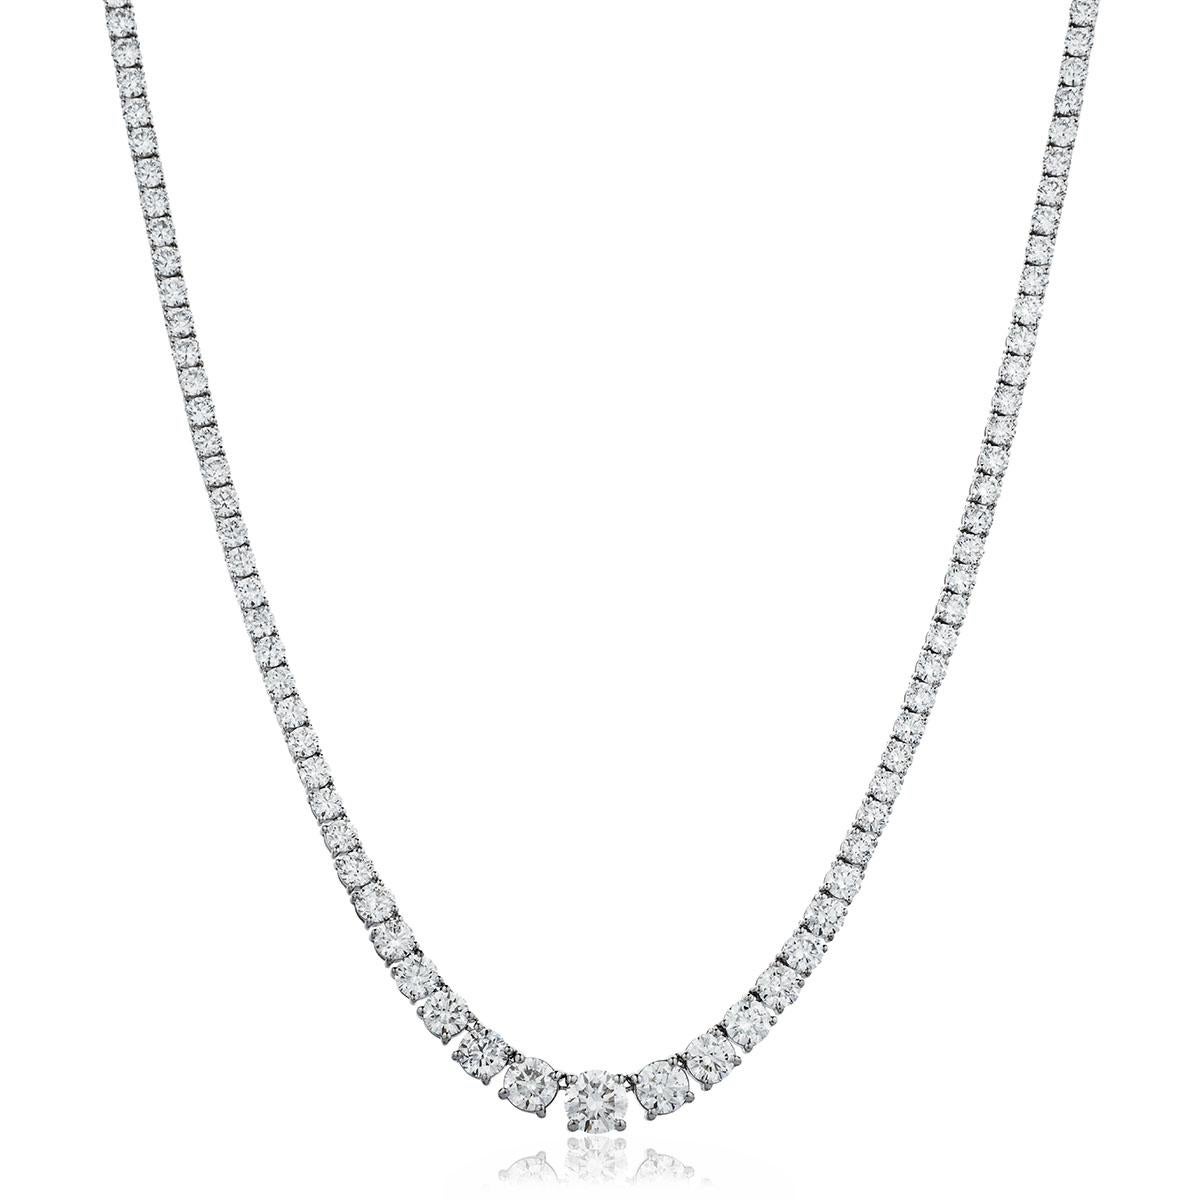 An impressive Riviera Tennis Necklace which features a substantial total Diamond weight of 7.35 Carats in beautifully graduated Round Brilliant Cut gems with a sparkly white color G clarity SI1 eye clean, the largest of which is 0.32 Carat. Each